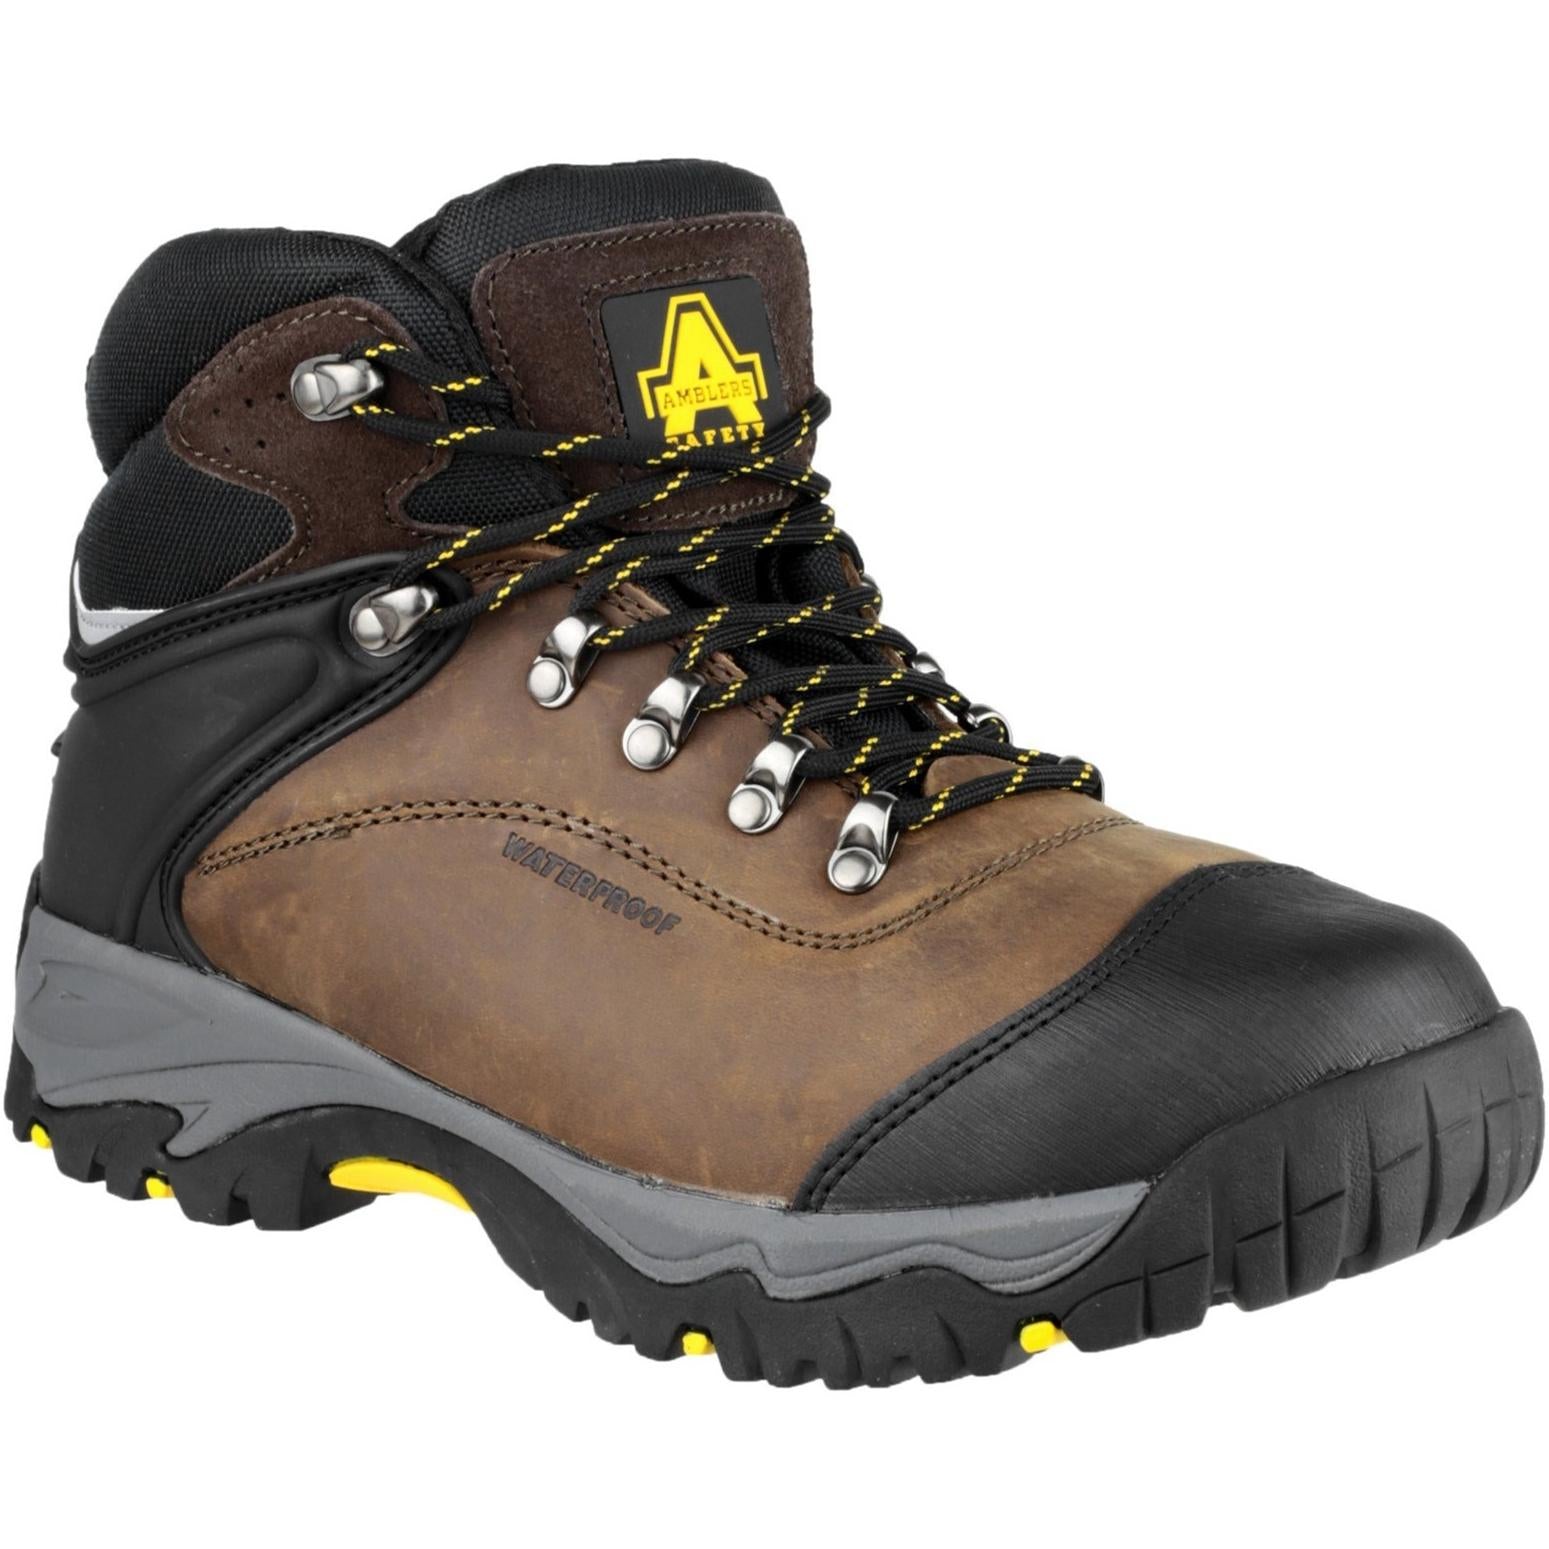 Amblers Safety FS993 Waterproof Hardwearing Lace up Safety Shoes